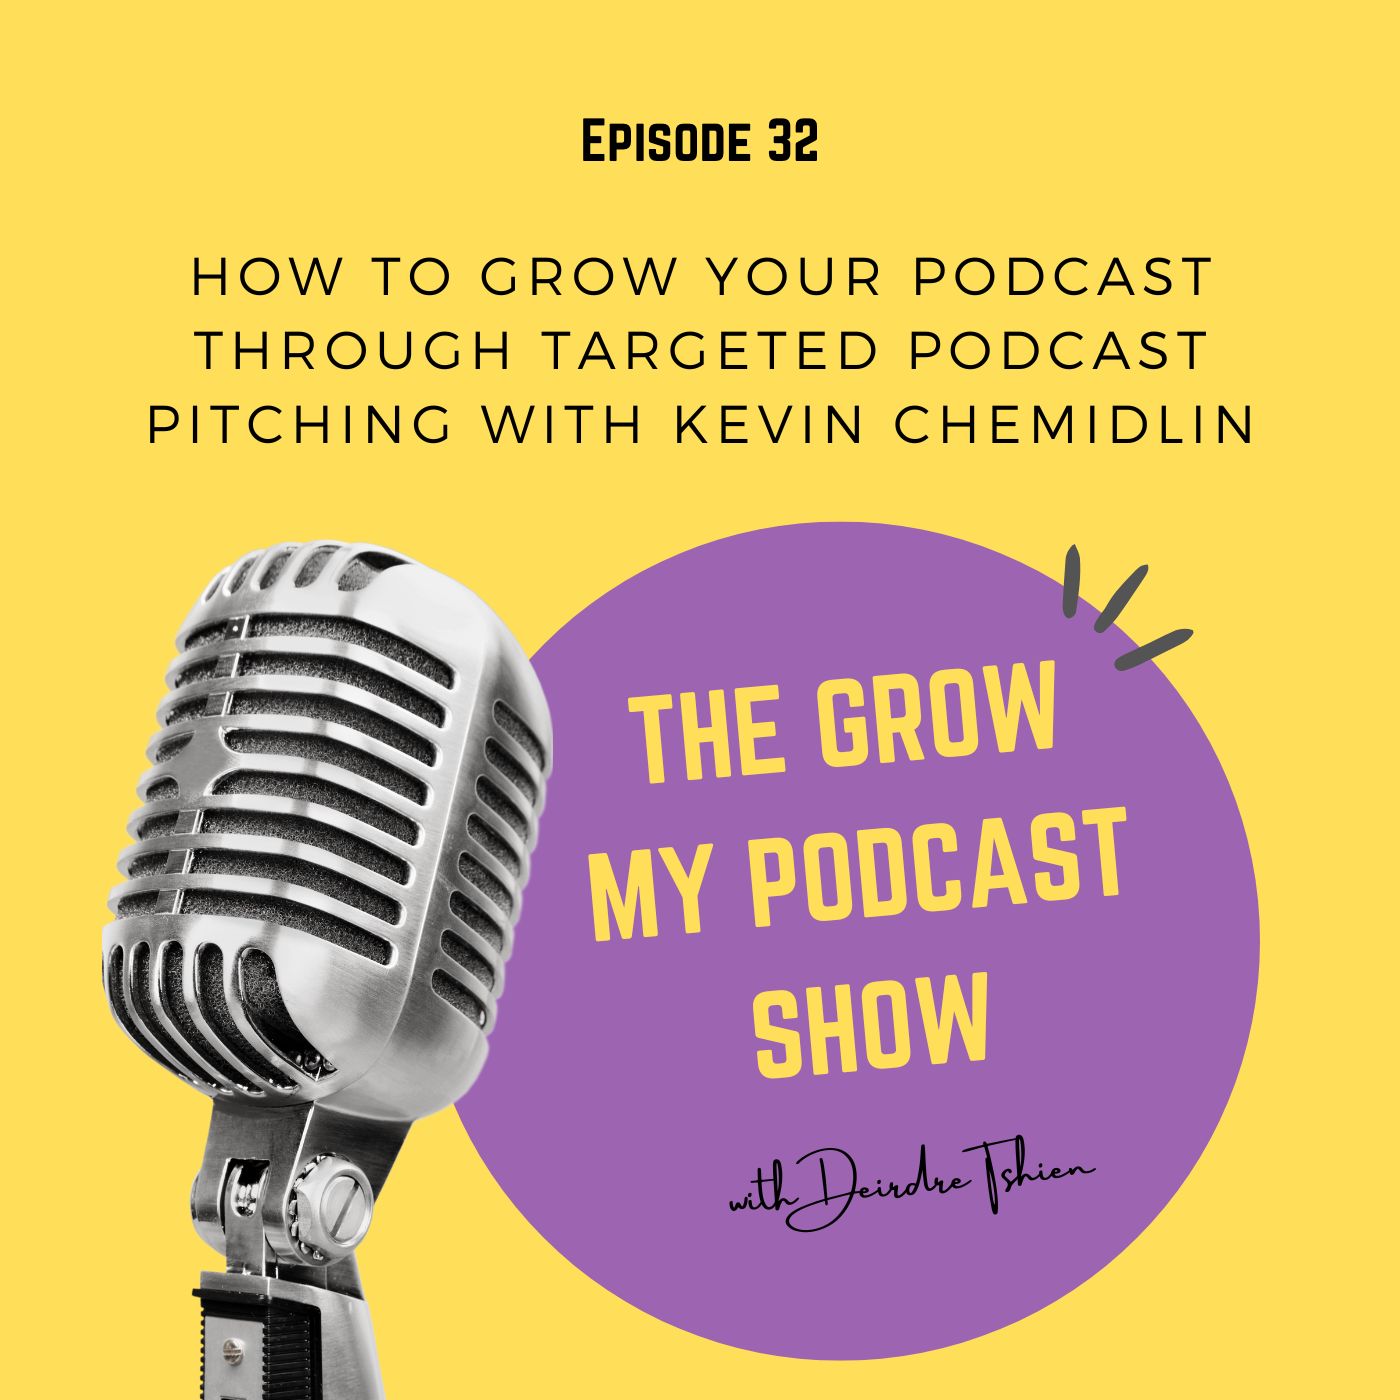 32. How to Grow Your Podcast Through Targeted Podcast Pitching with Kevin Chemidlin